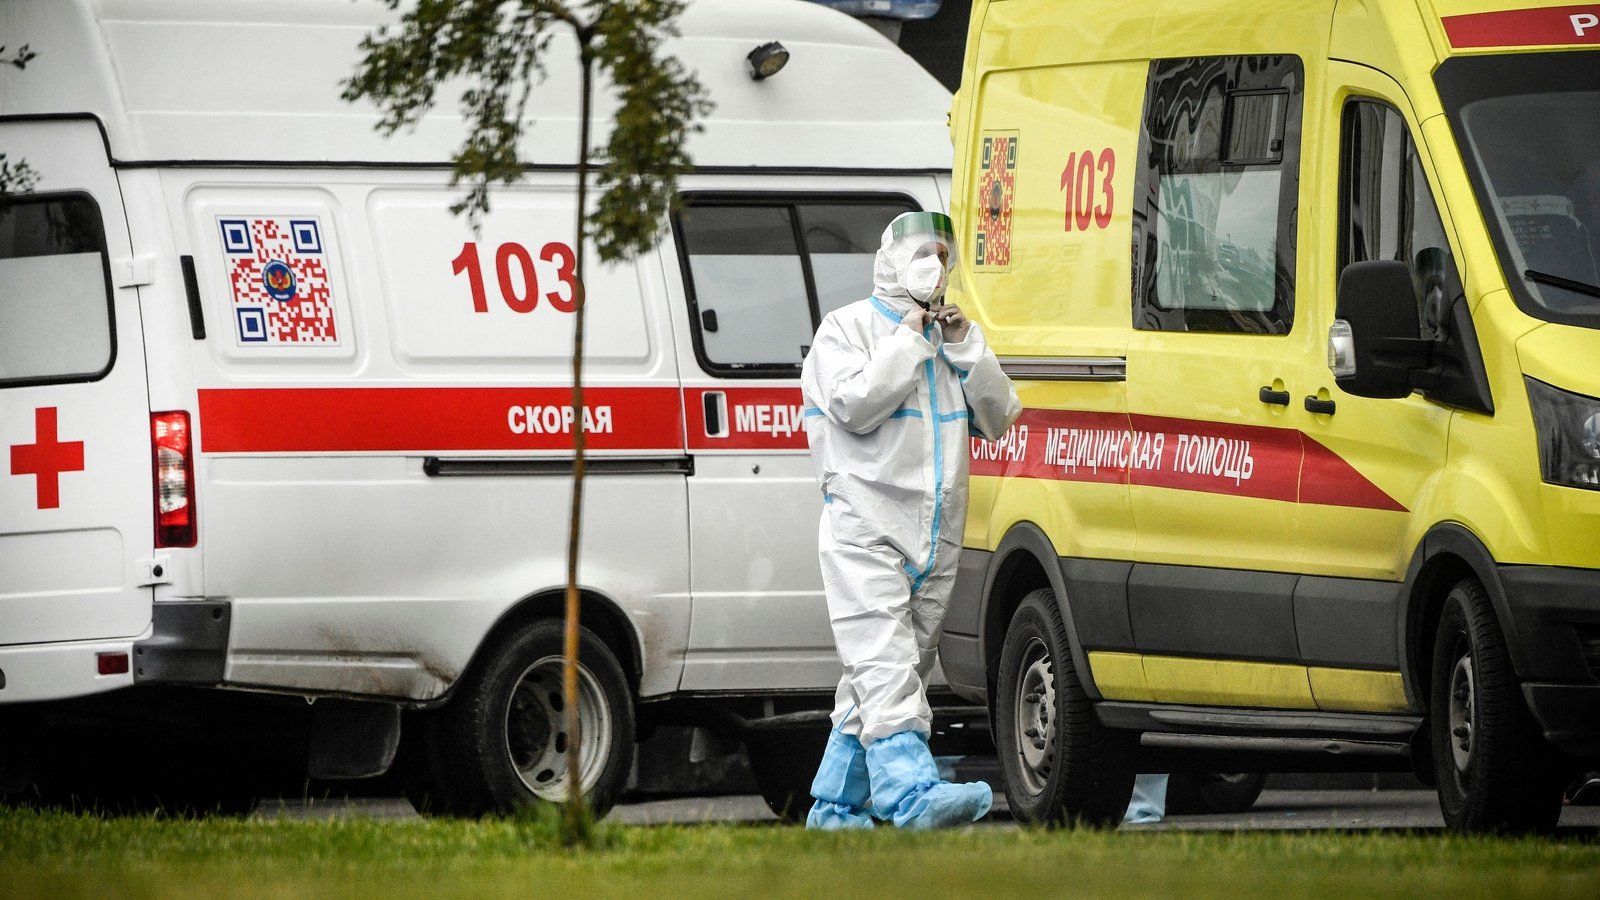 COVID-19 deaths in Russia reached an all-time high